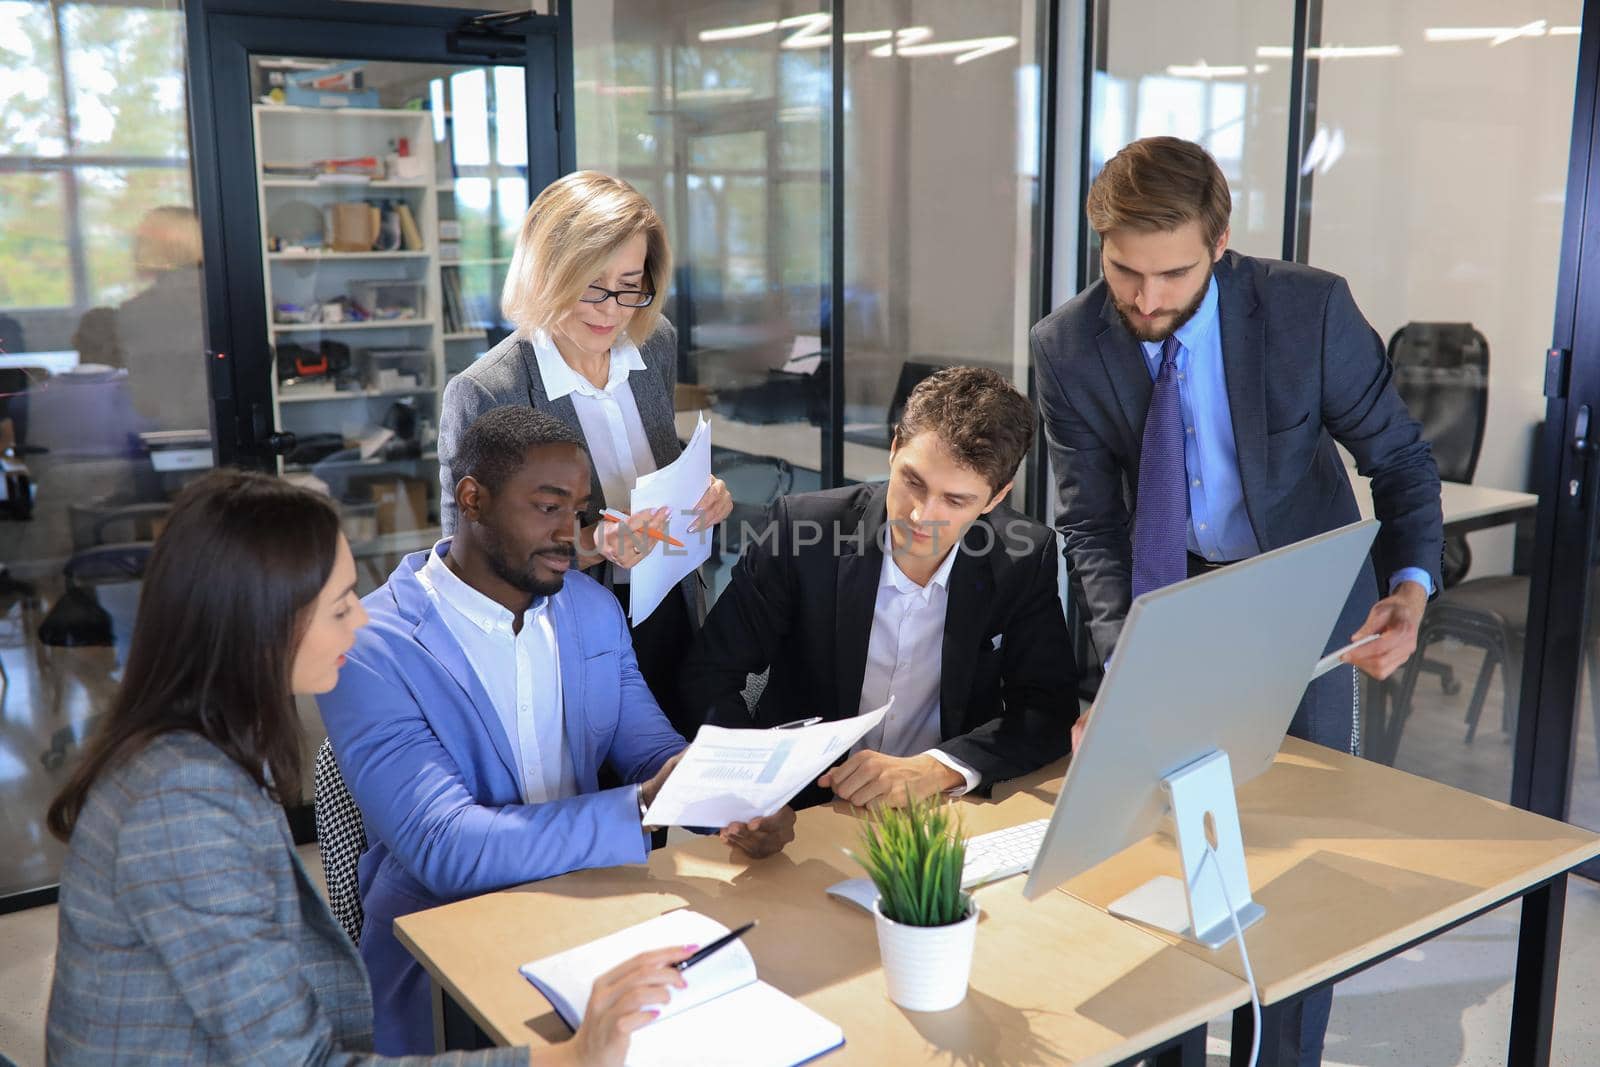 Five business people during a meeting sitting around a table